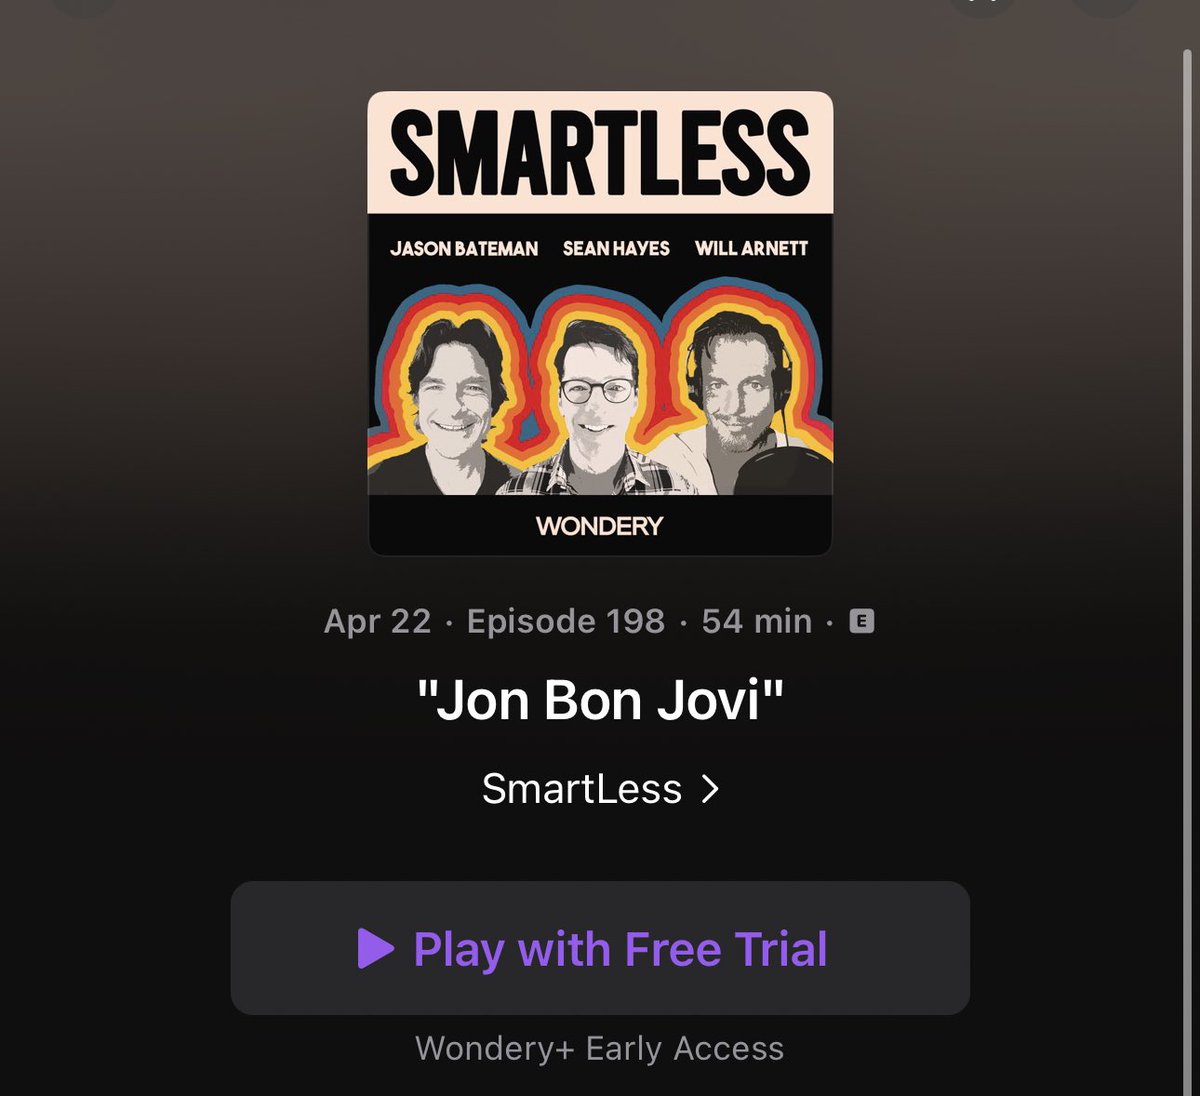 🚨New Interview Jon Bon Jovi is on Smartless Podcast! Out April 22, but you can stream early if you do a free trial for Wondery podcasts.apple.com/us/podcast/jon… #BonJovi #JonBonJovi